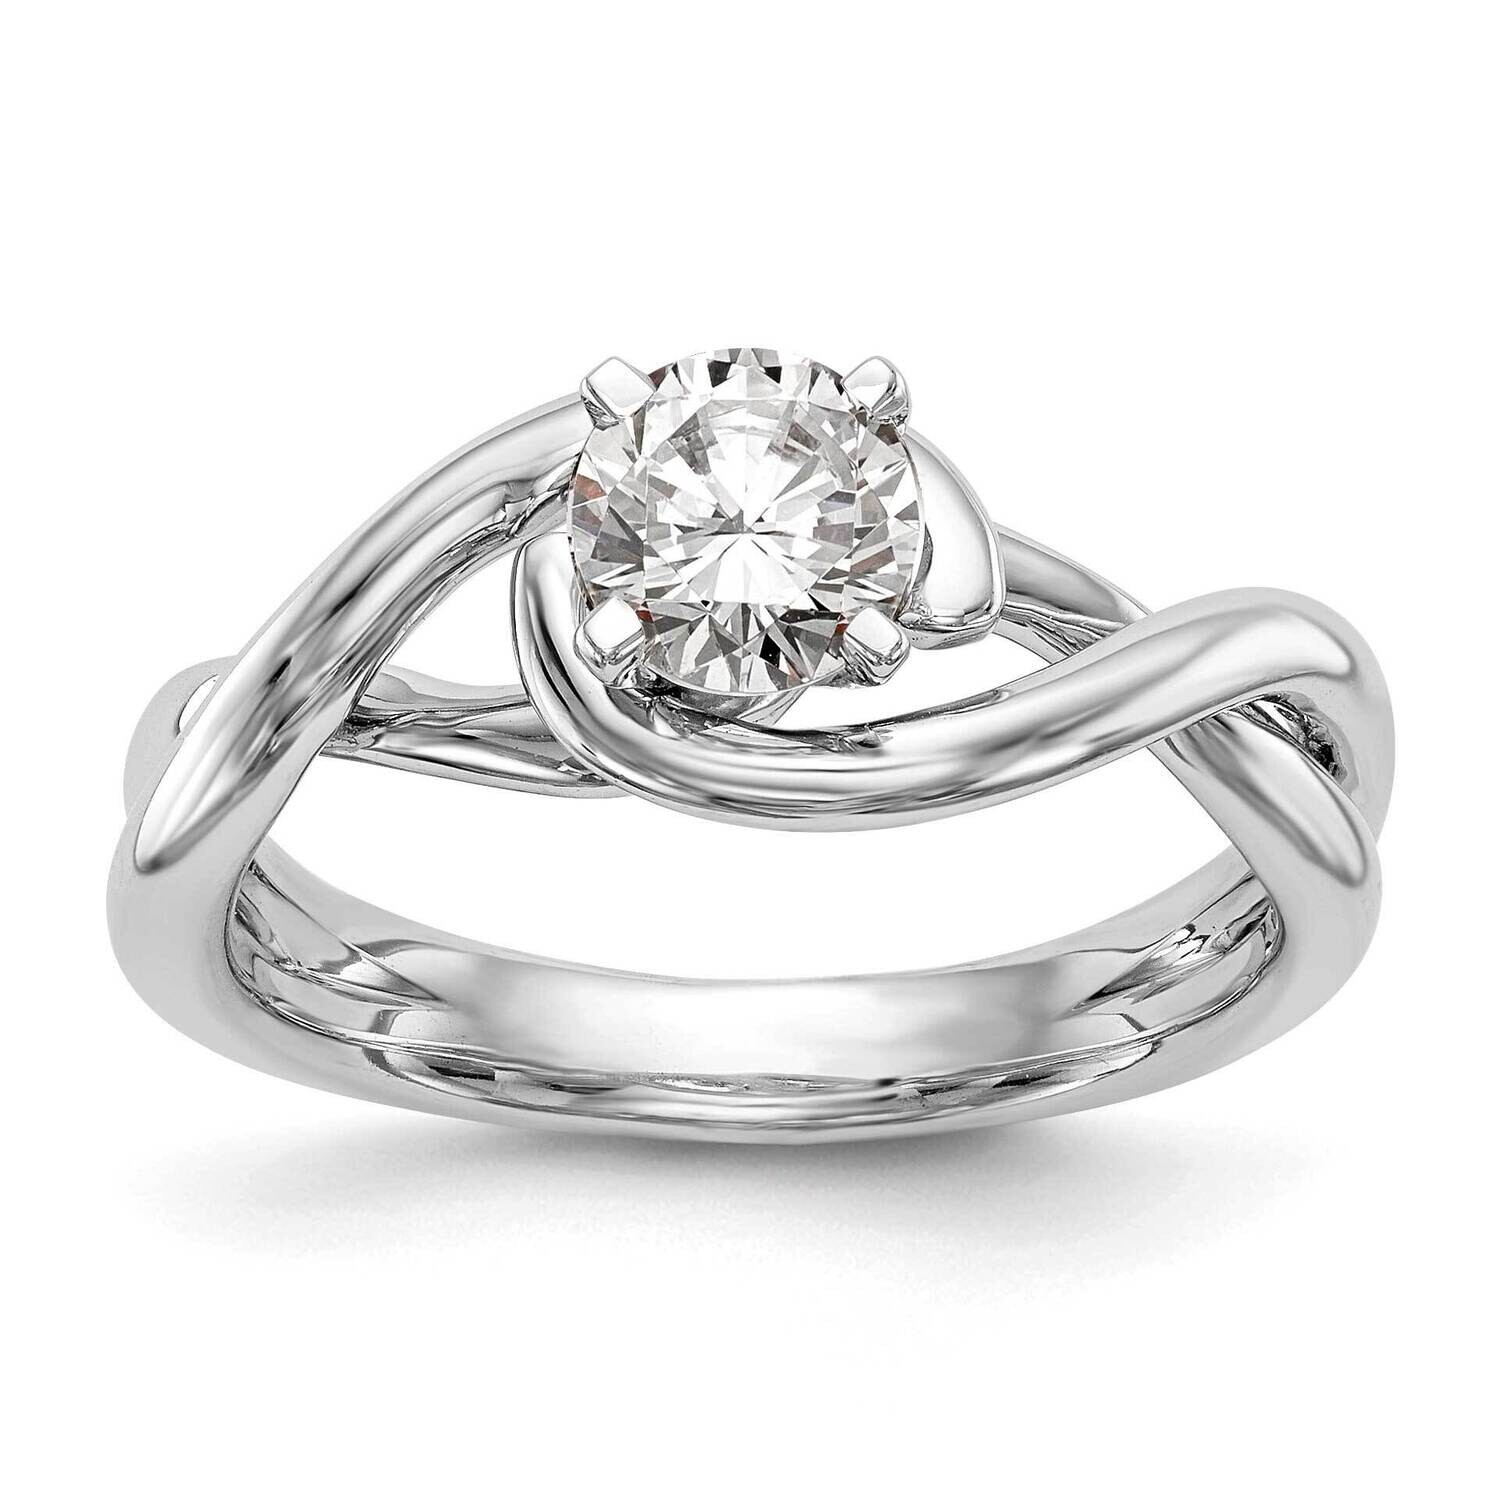 Peg Set Twist Solitaire Engagement Ring Mounting 14k White Gold RM1999E-CWAA